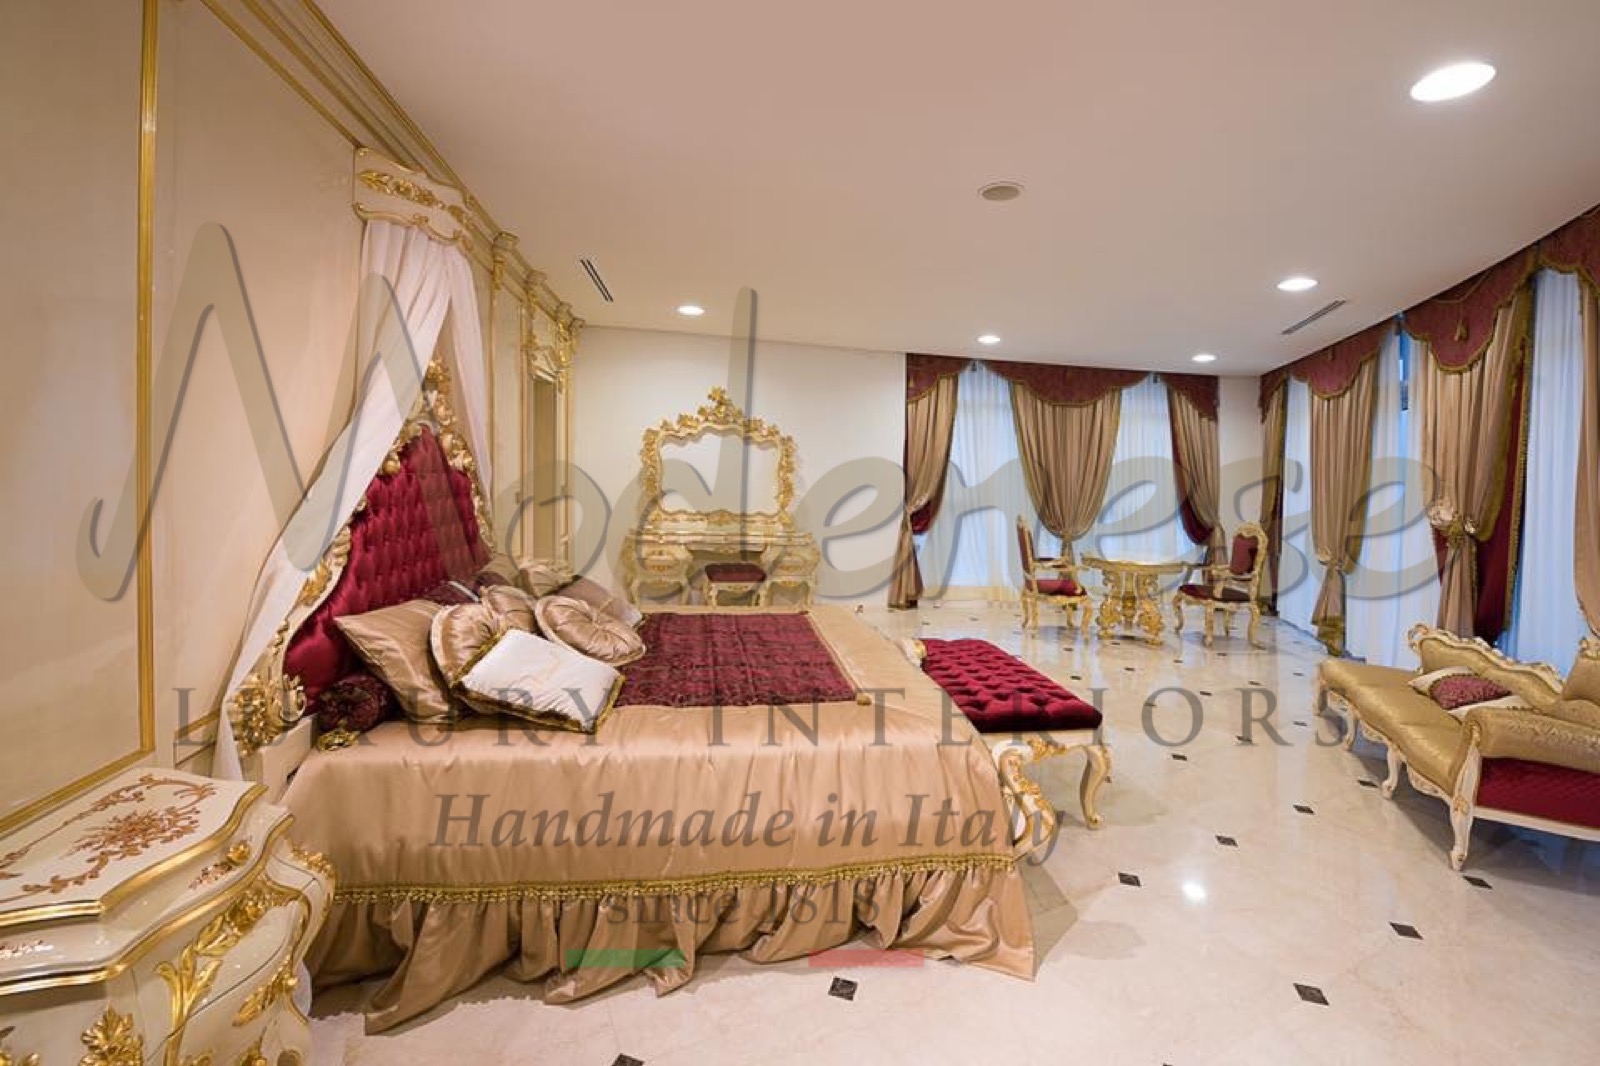 A luxurious master bedroom with a beautiful four-poster bed, featuring an ornate curved headboard and a rich variety of colors and textures.Italian furniture interior design Abuja Nigeria Africa new showroom opening royal projects villa residential palace government building home decoraton 24k gold leaf details boiserie solid wood